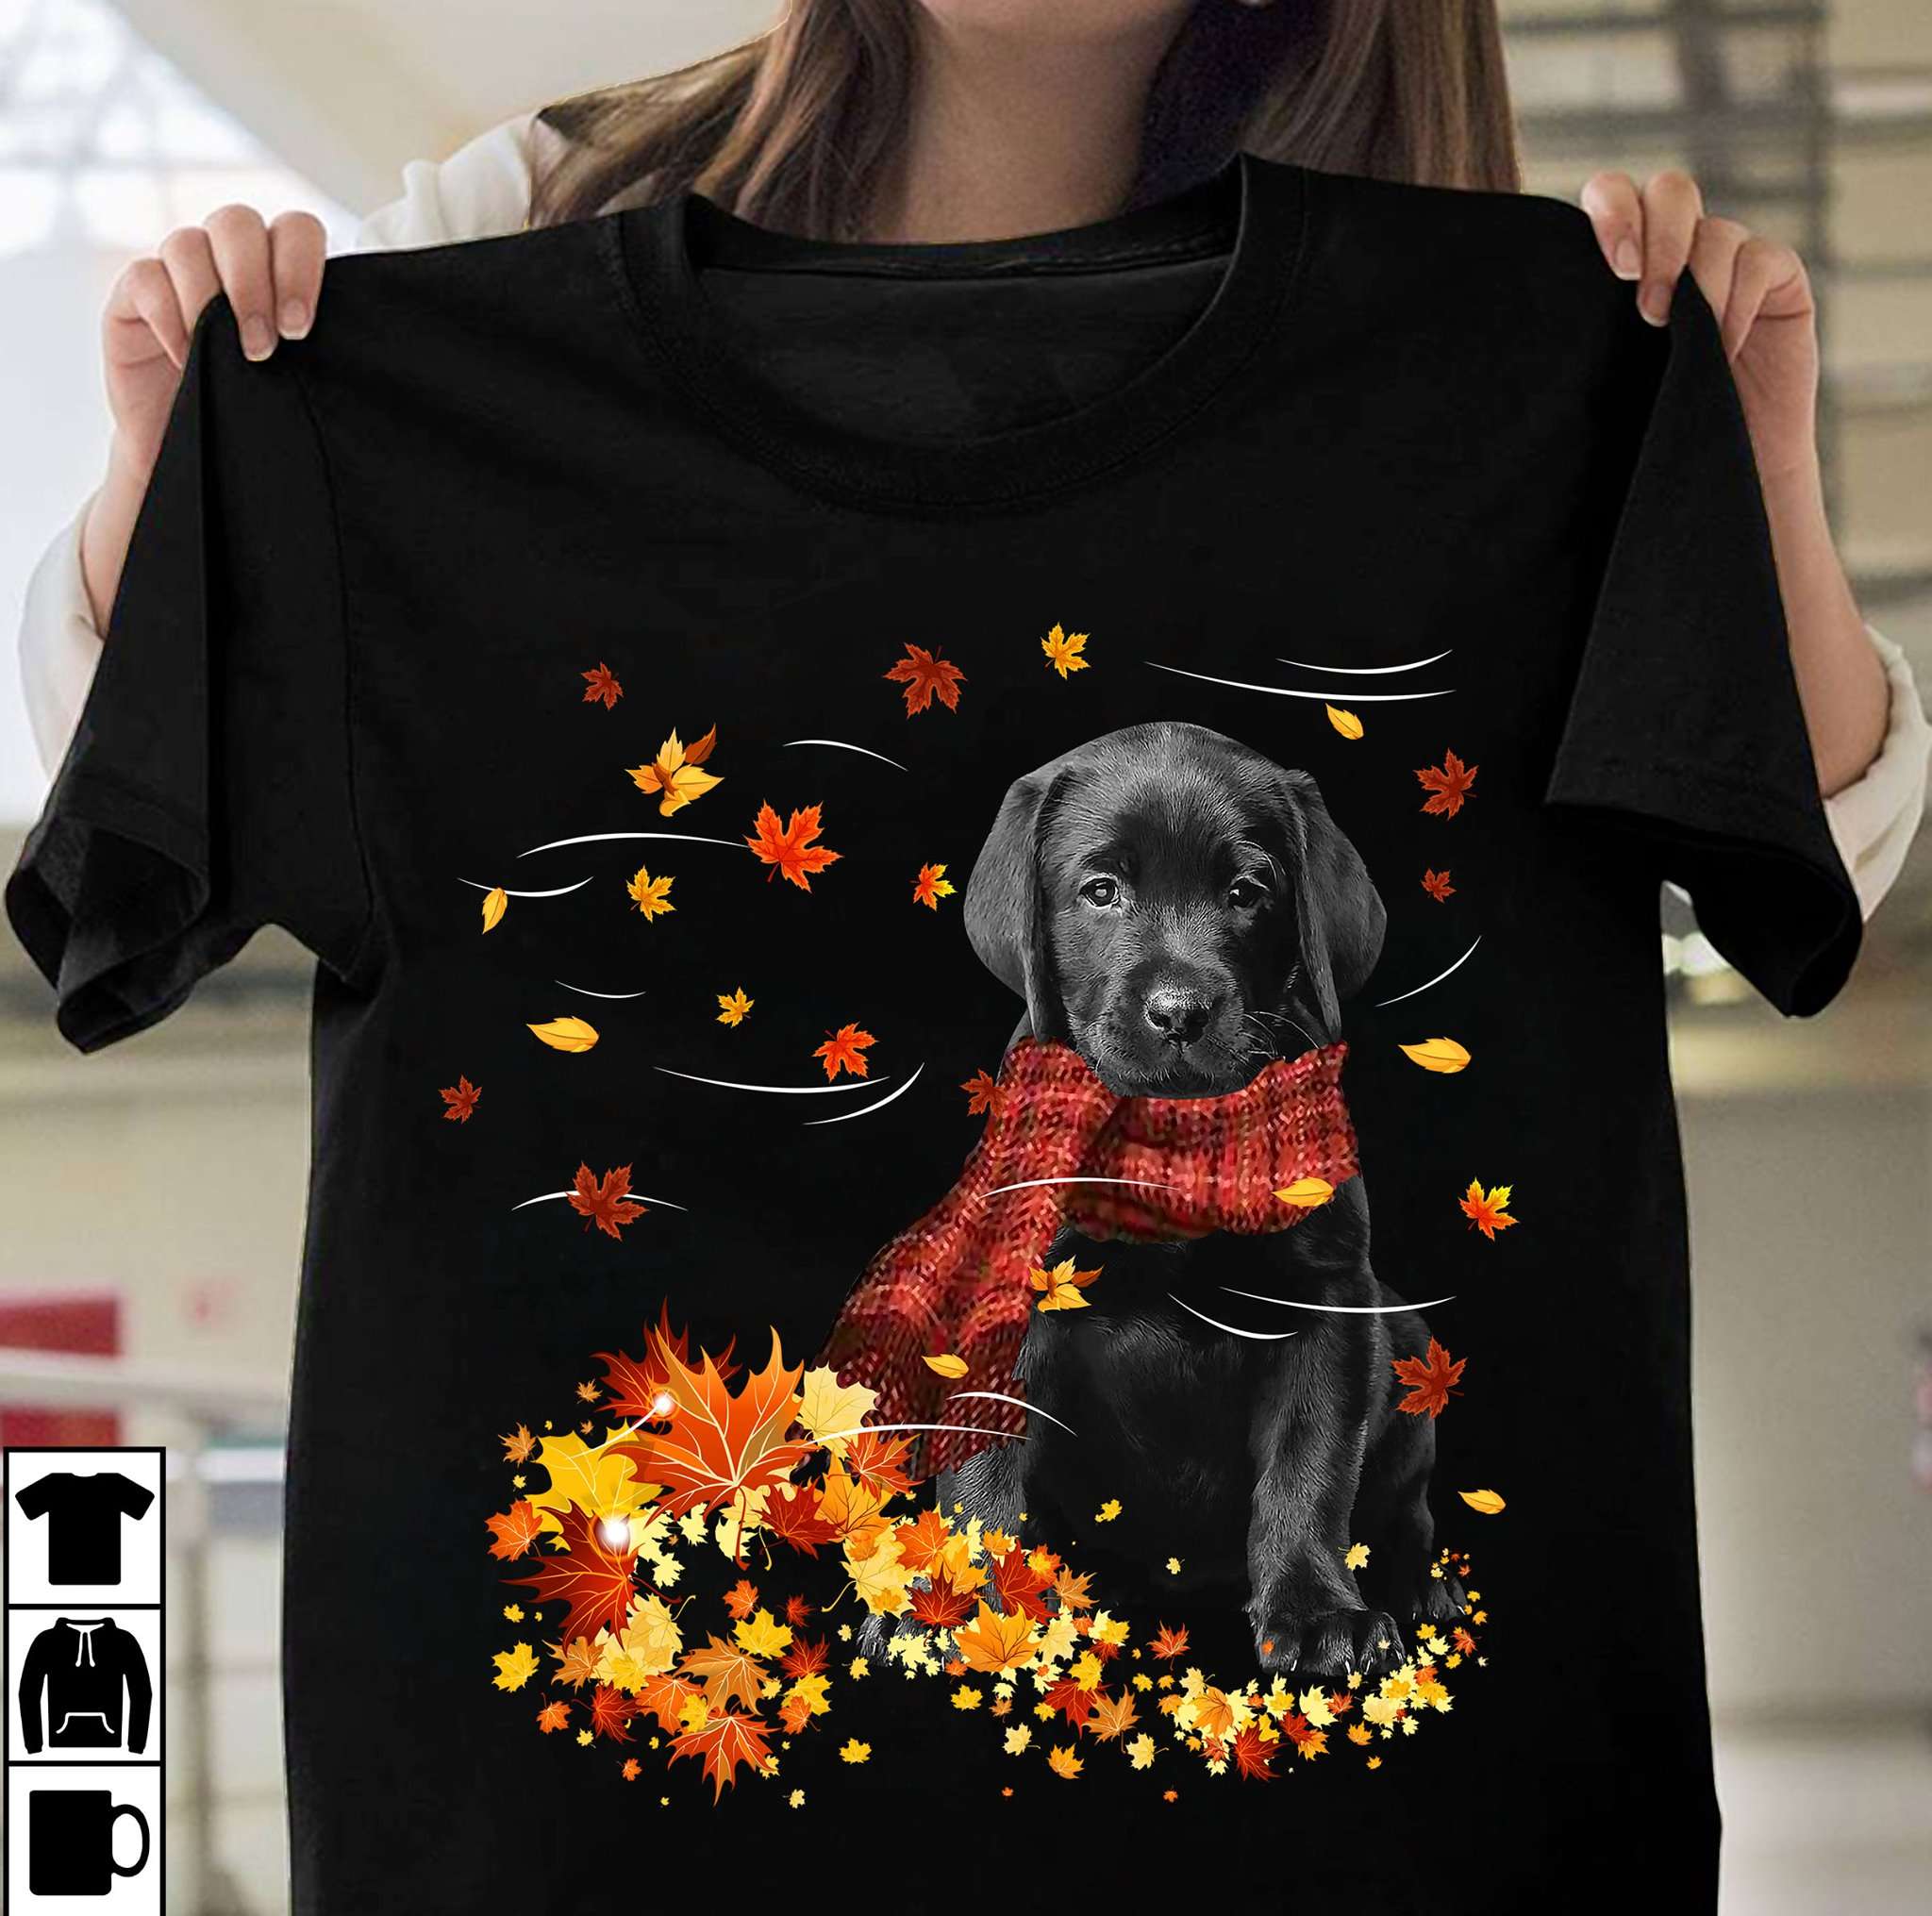 Puppy dog in Fall - Fall the wonderful season, T-shirt for dog lover